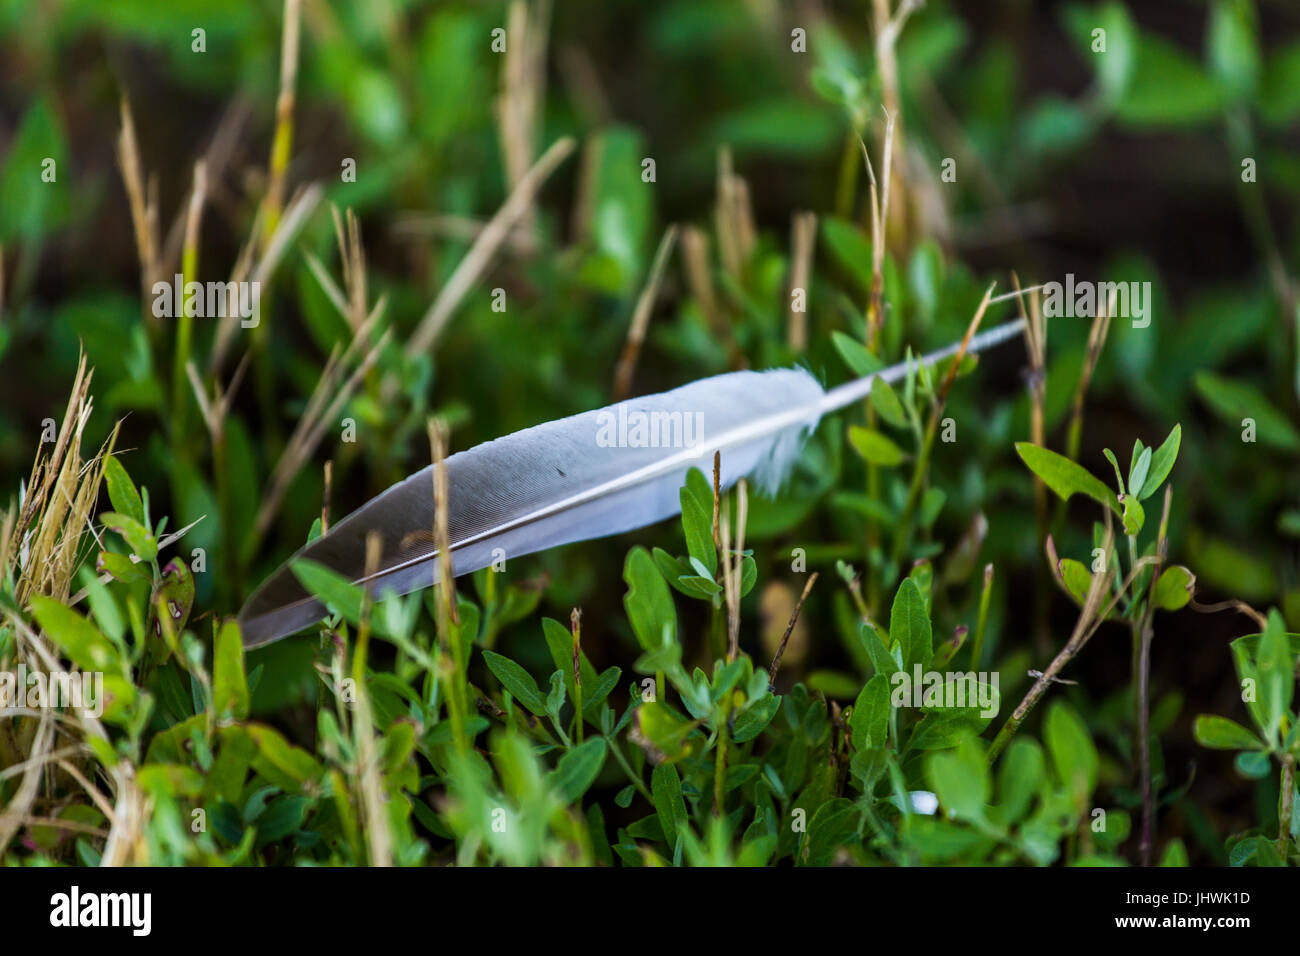 Fallen pigeon's feather lying on the grass. Stock Photo